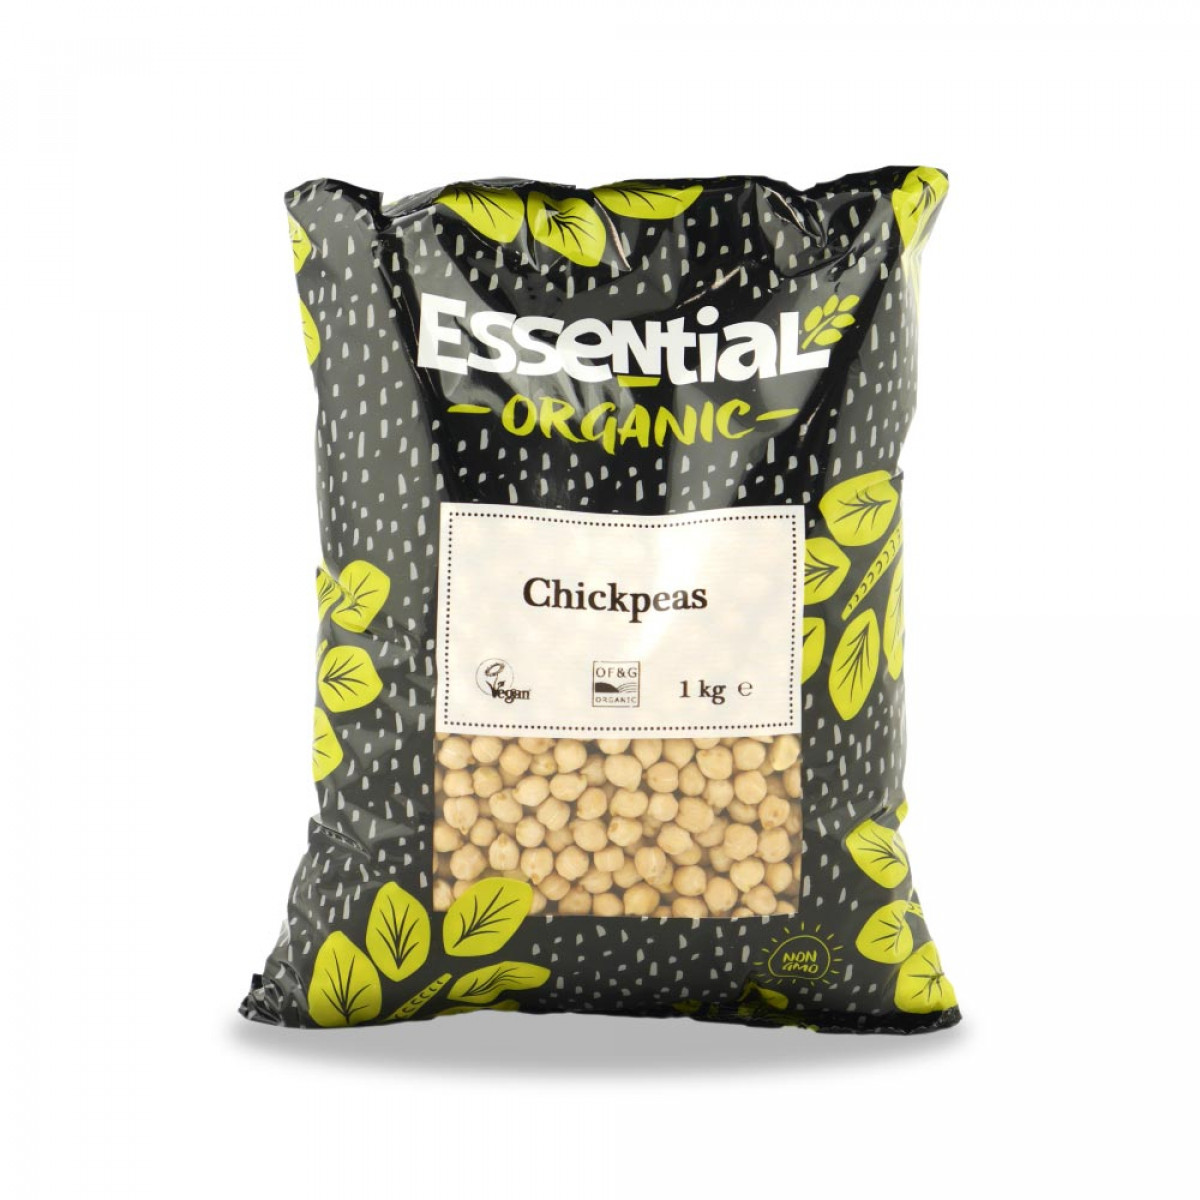 Product picture for Chickpeas